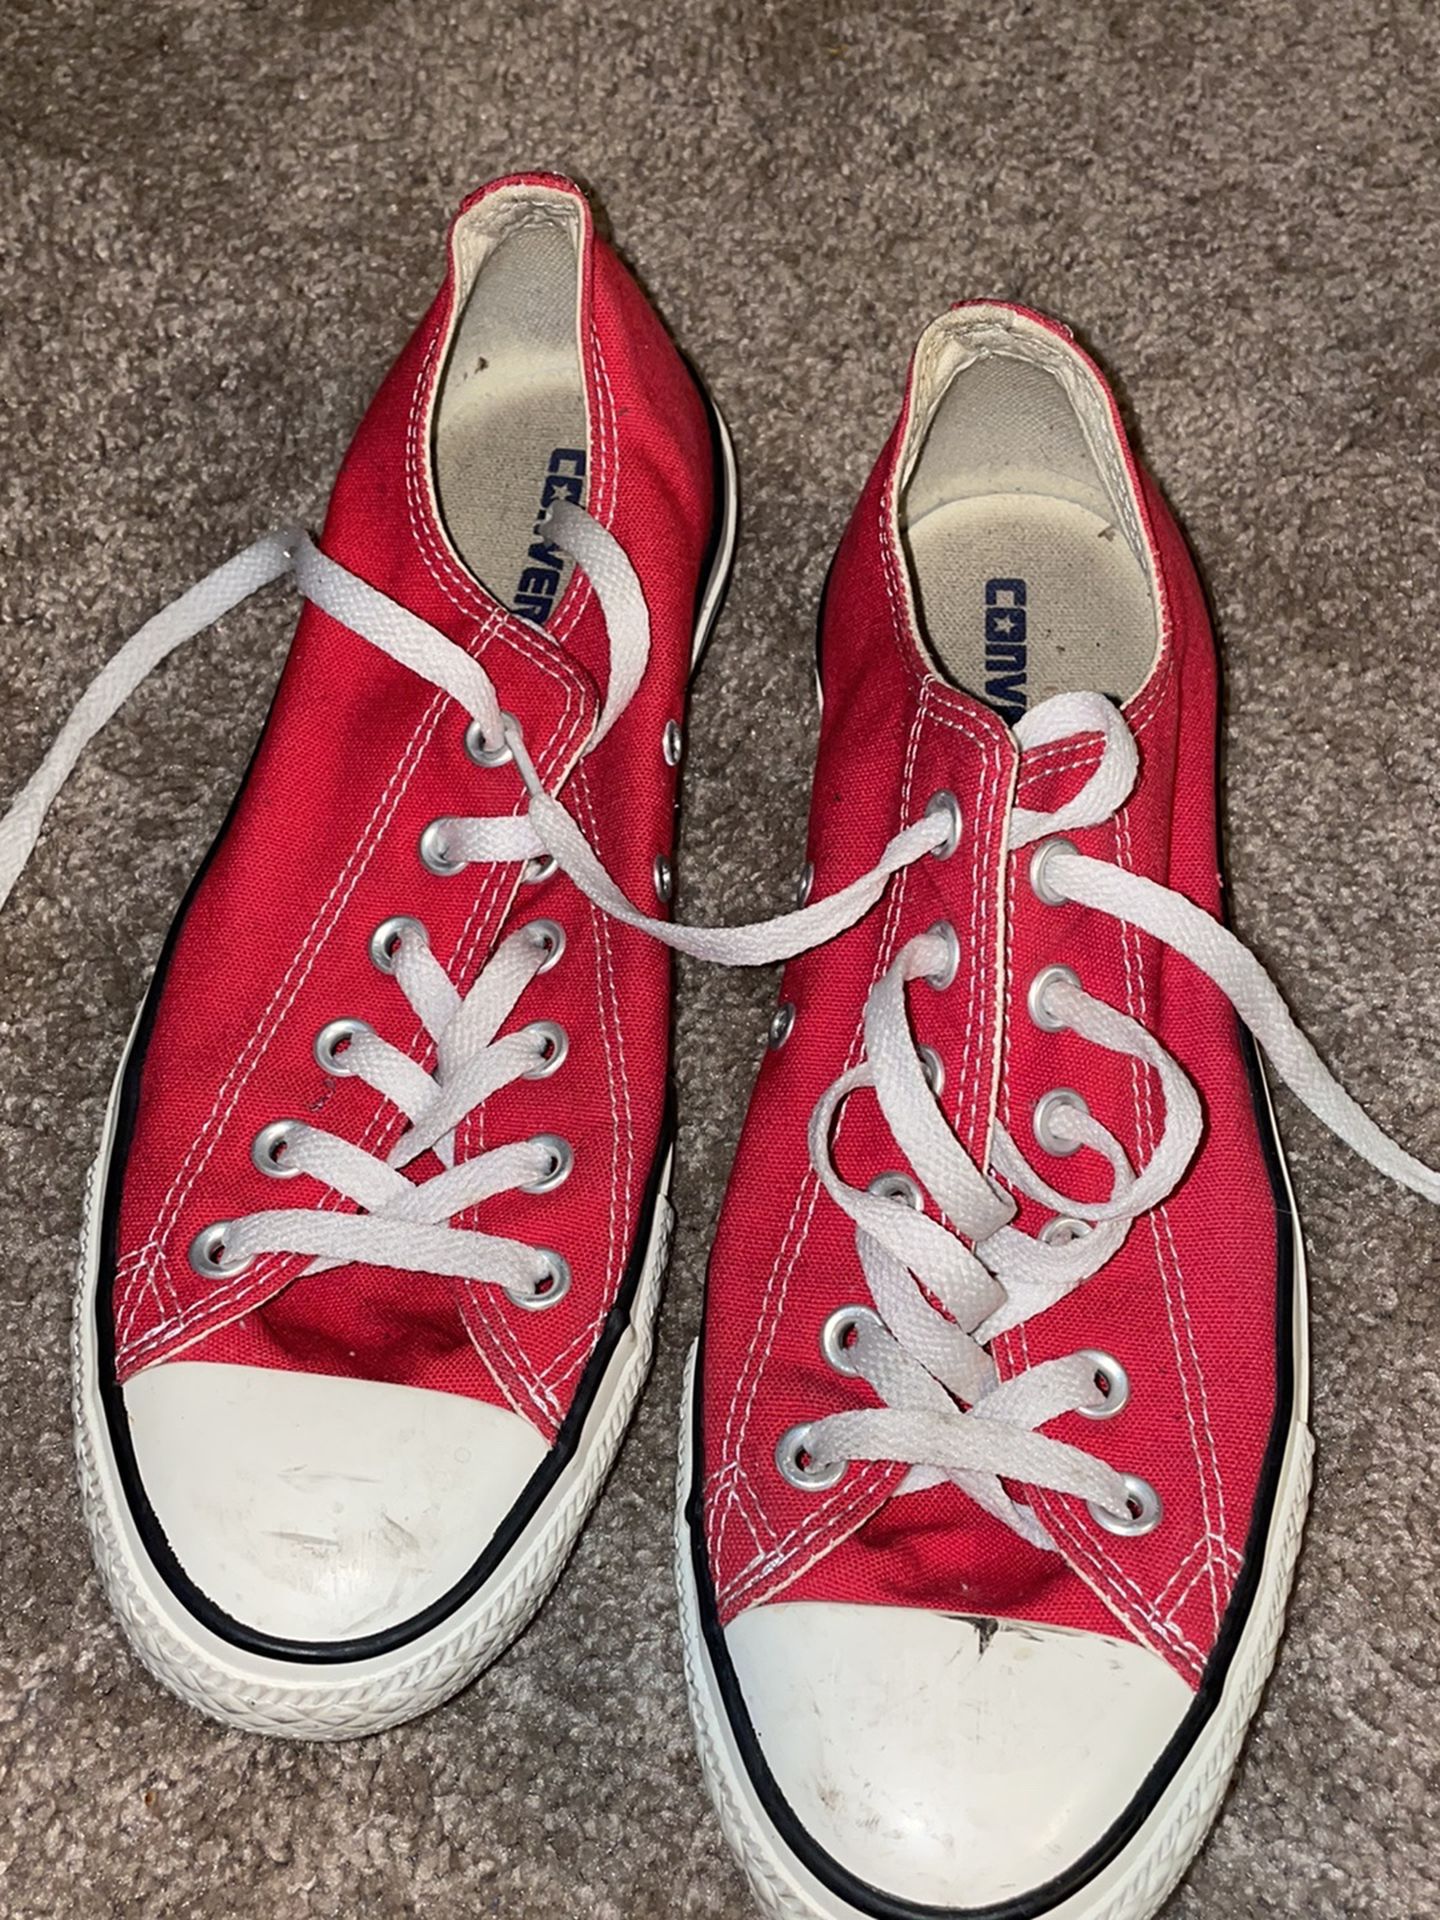 Converse for Sale in Spring Valley, CA - OfferUp